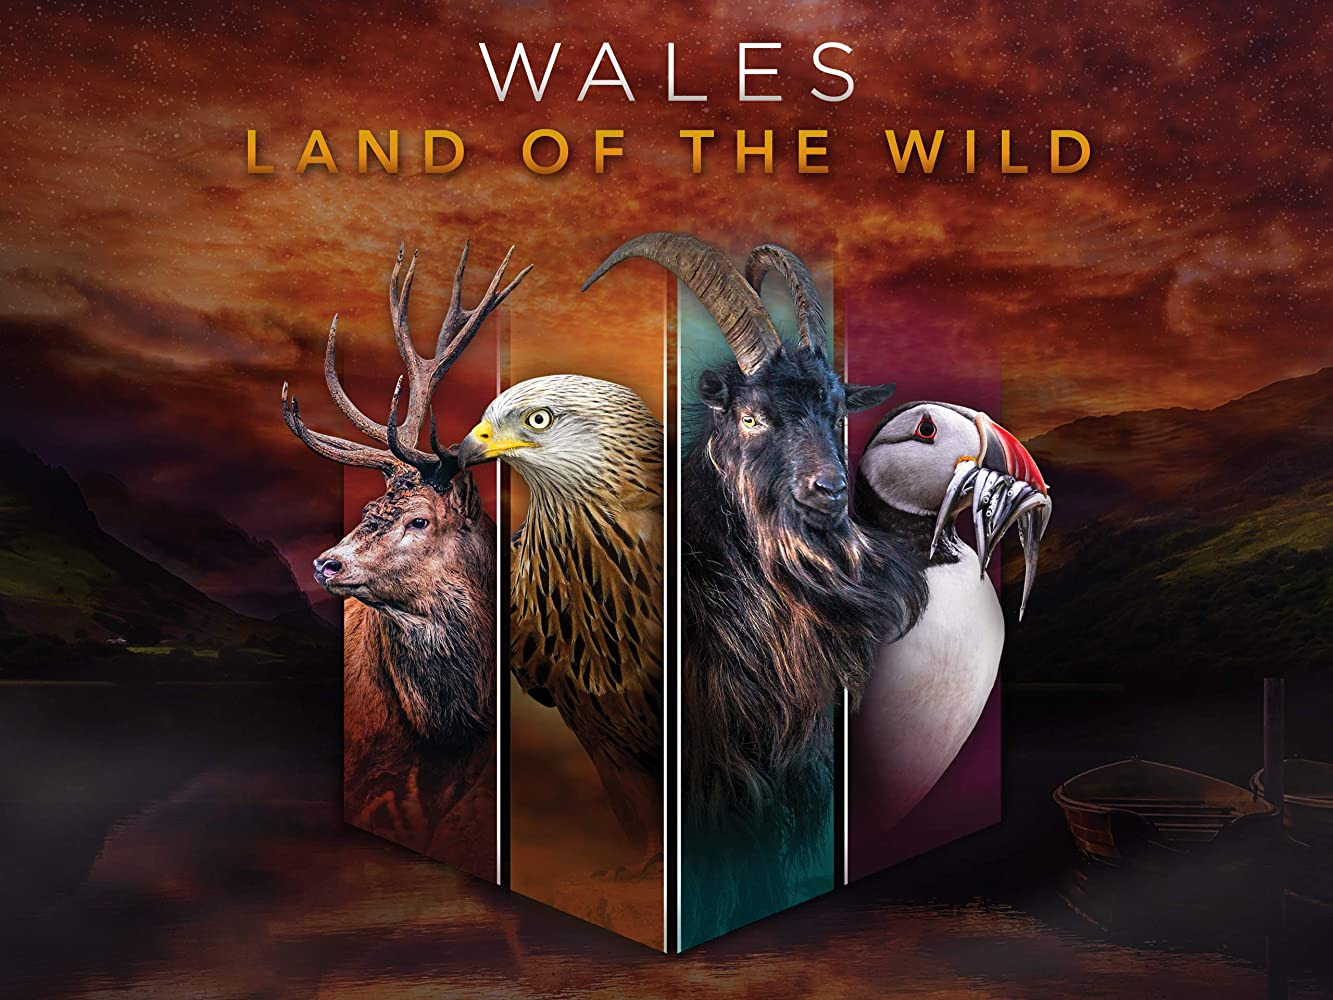 Show Wales: Land of the Wild